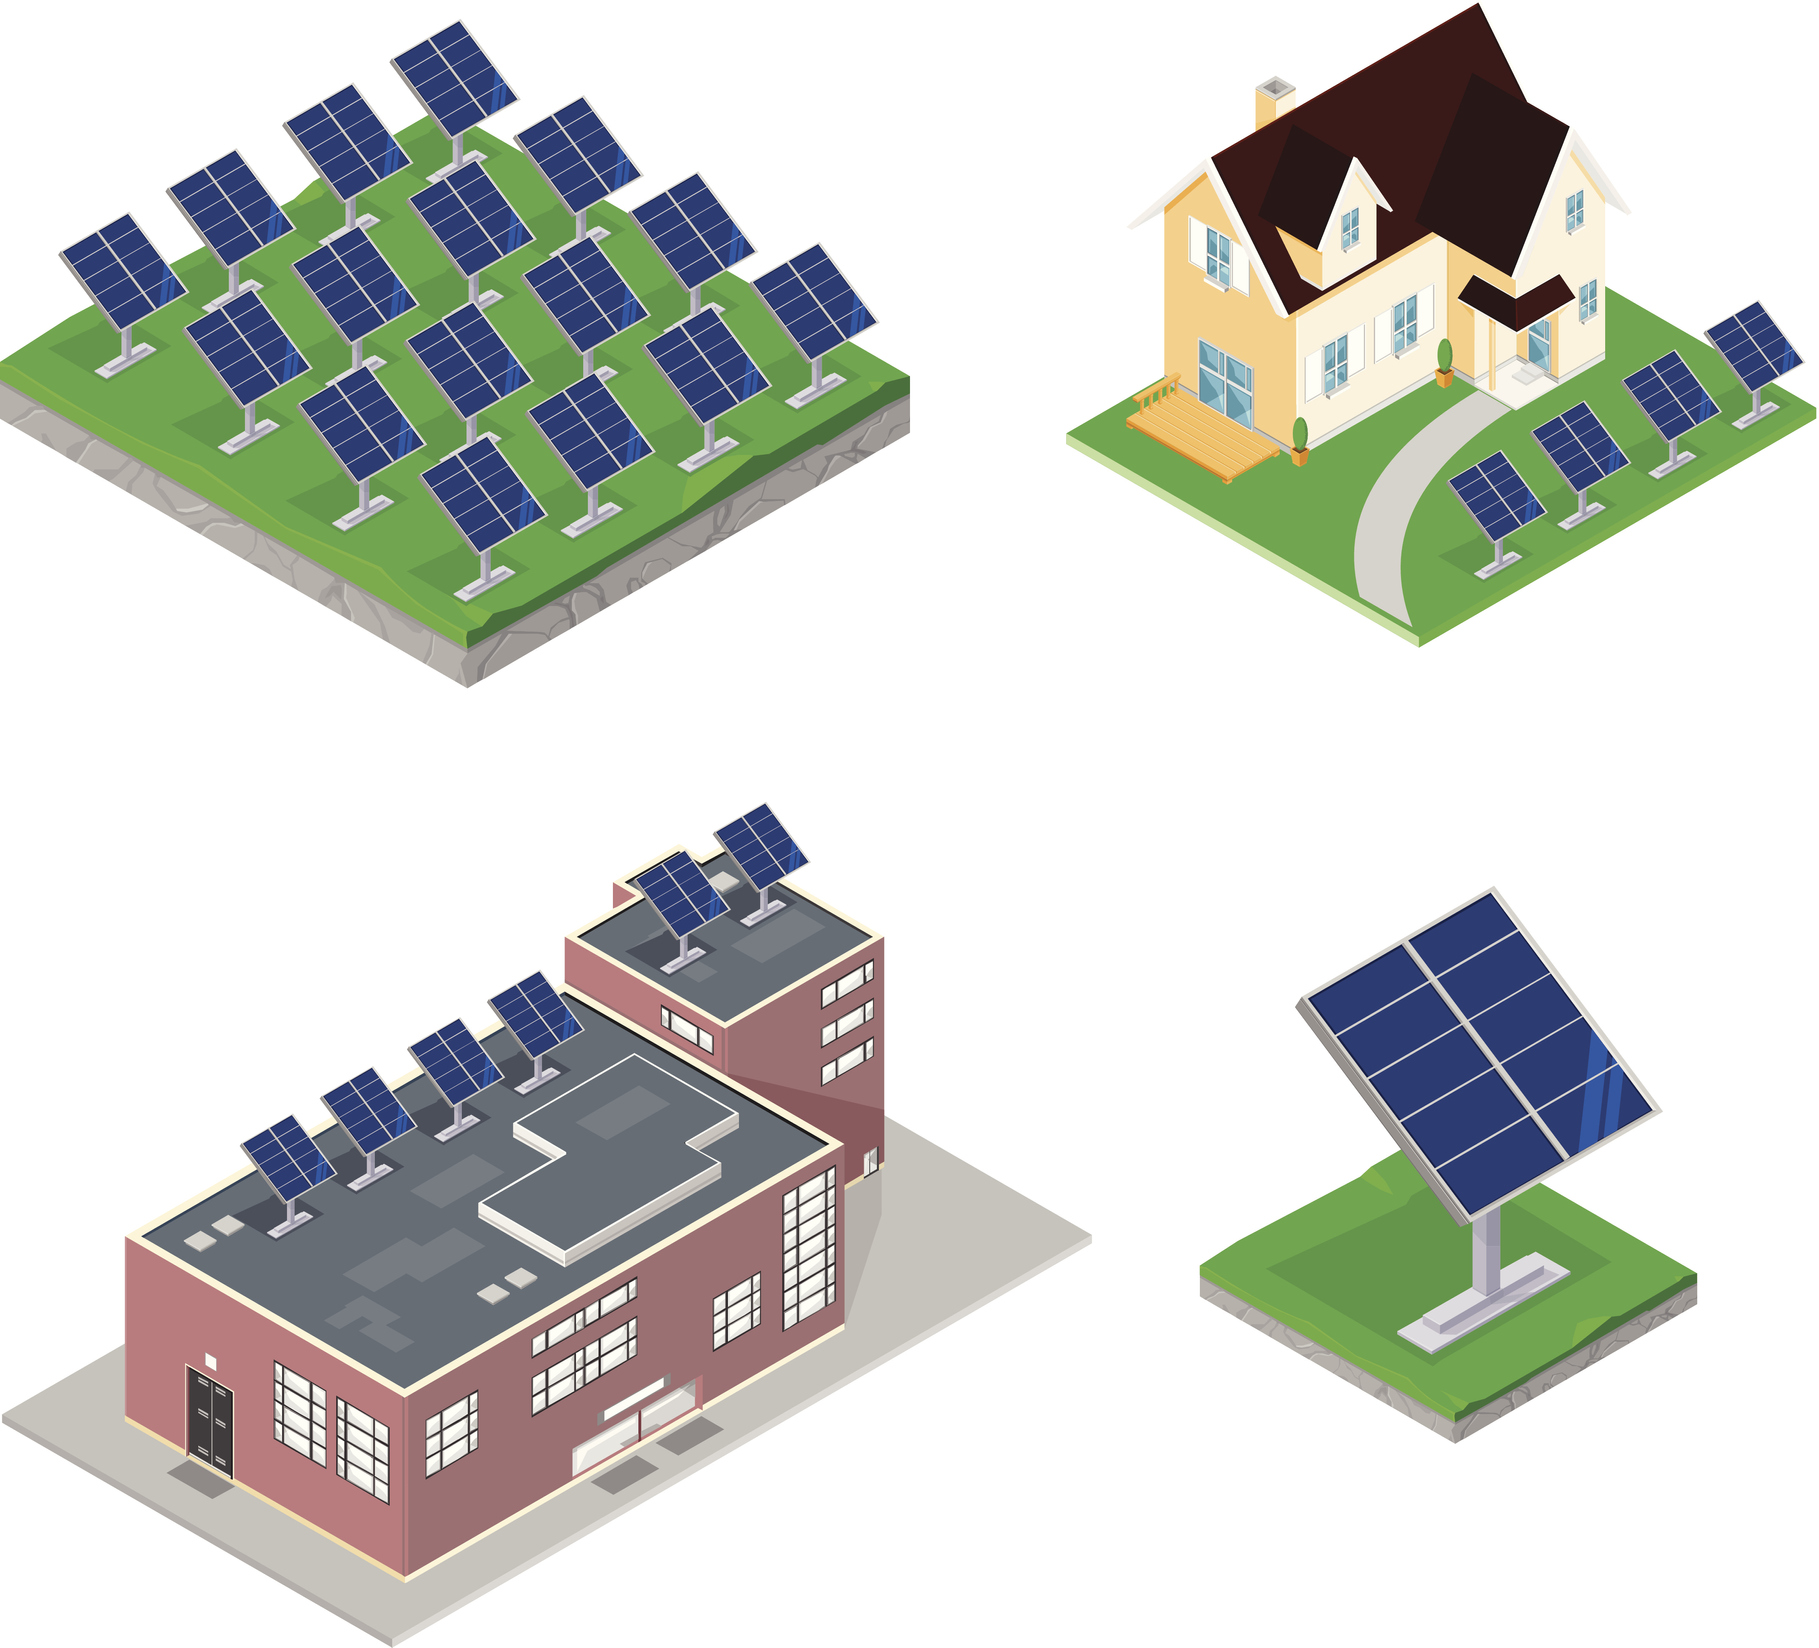 Infographic depicting different types of bifacial solar module installations